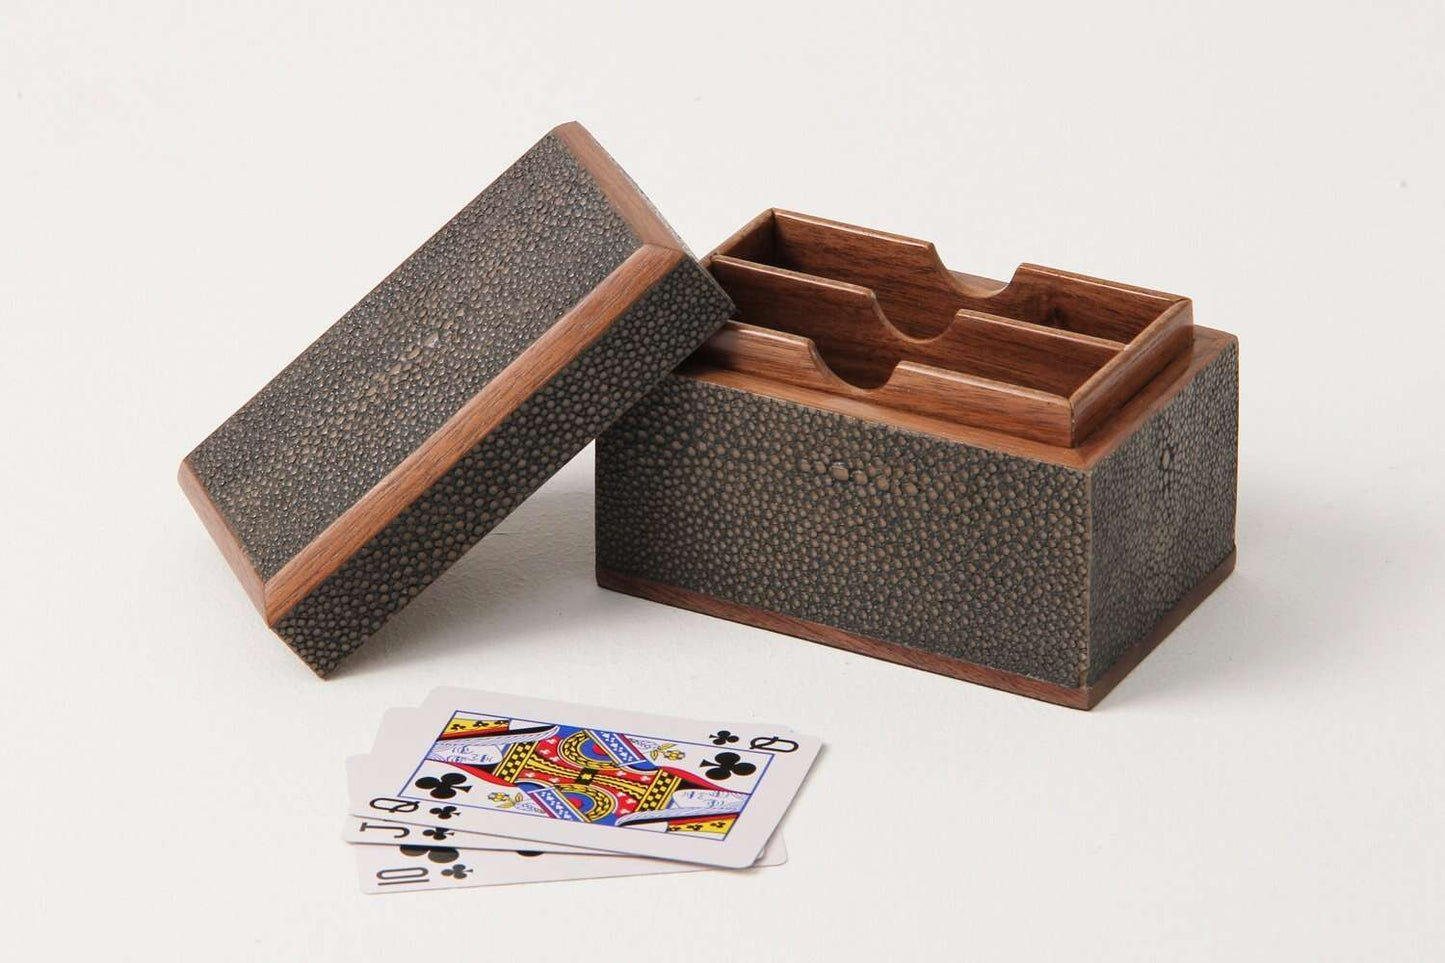  playing card box unique brown shagreen playing card box